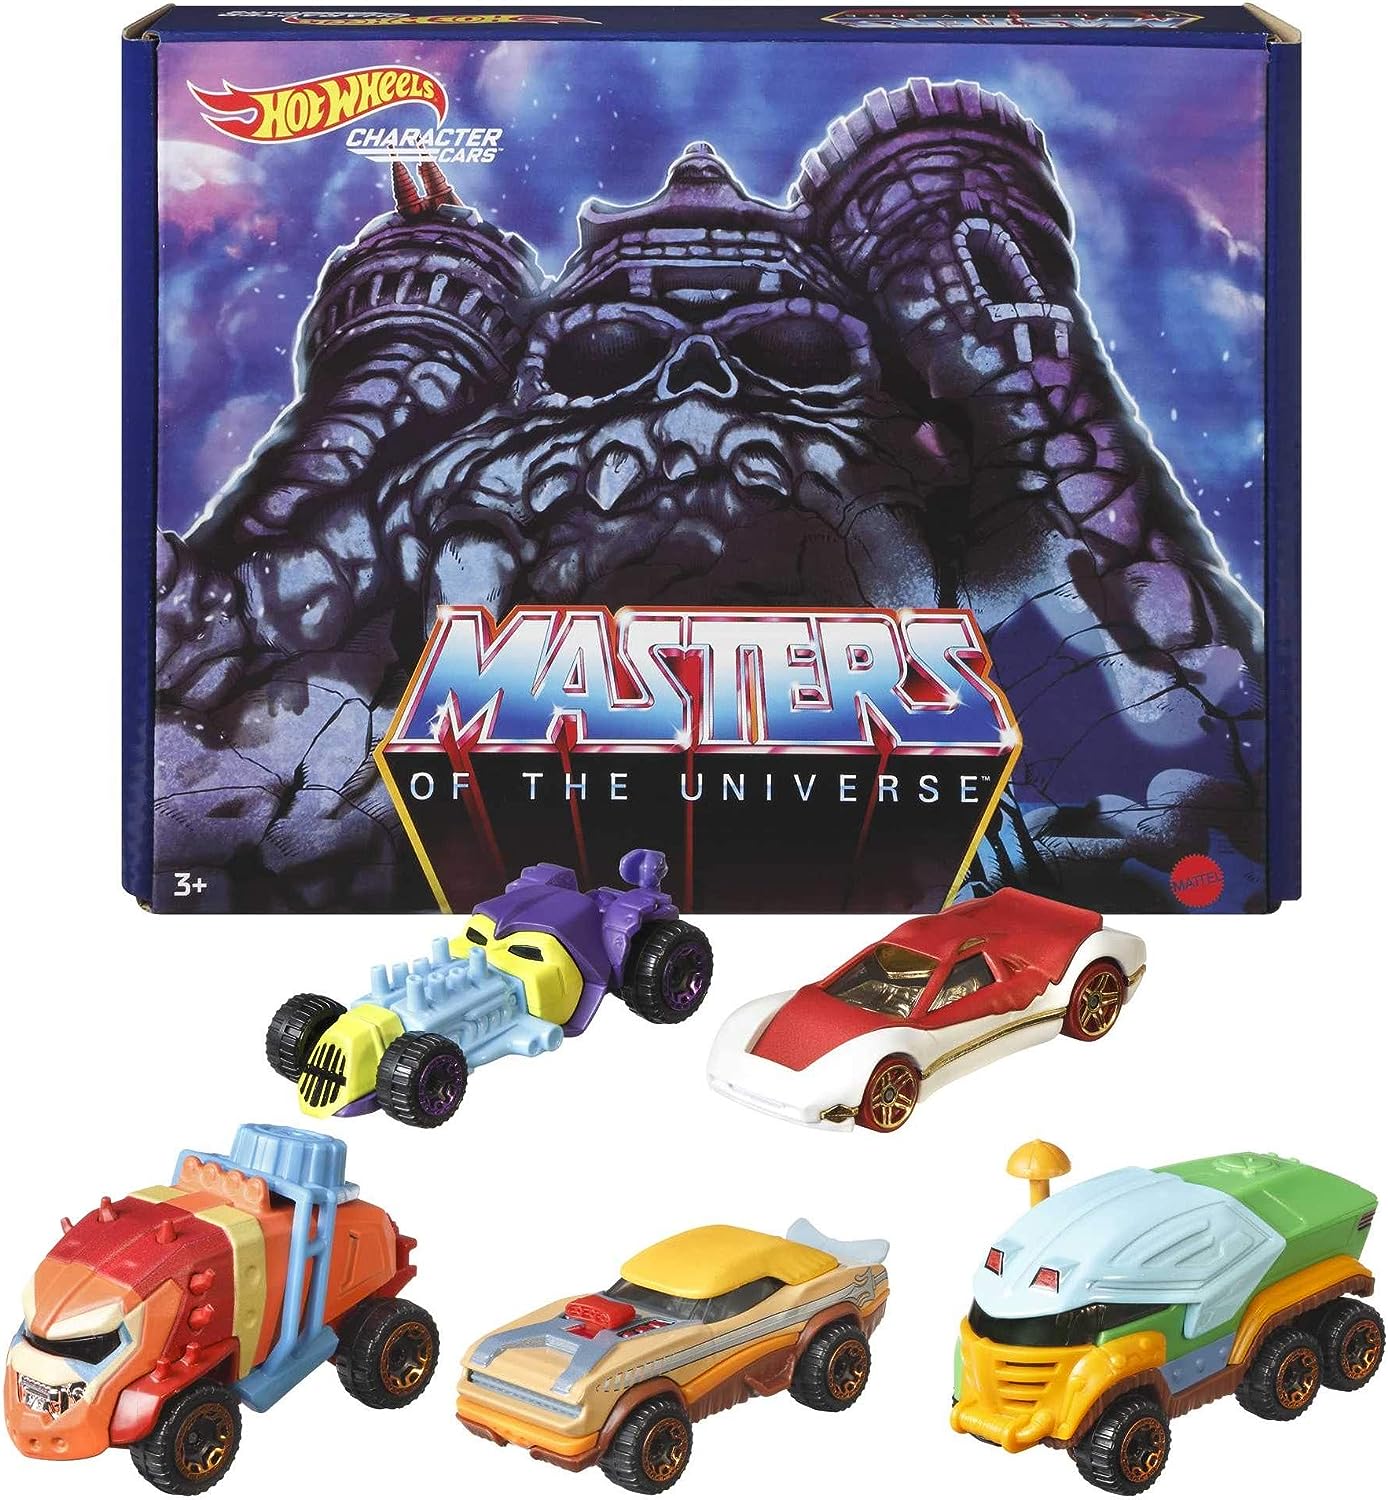 5-Pack Hot Wheels Masters of the Universe (Inspired by He-Man, Skeletor & More) $10.20+ Free Shipping w/ Prime or on orders $35+